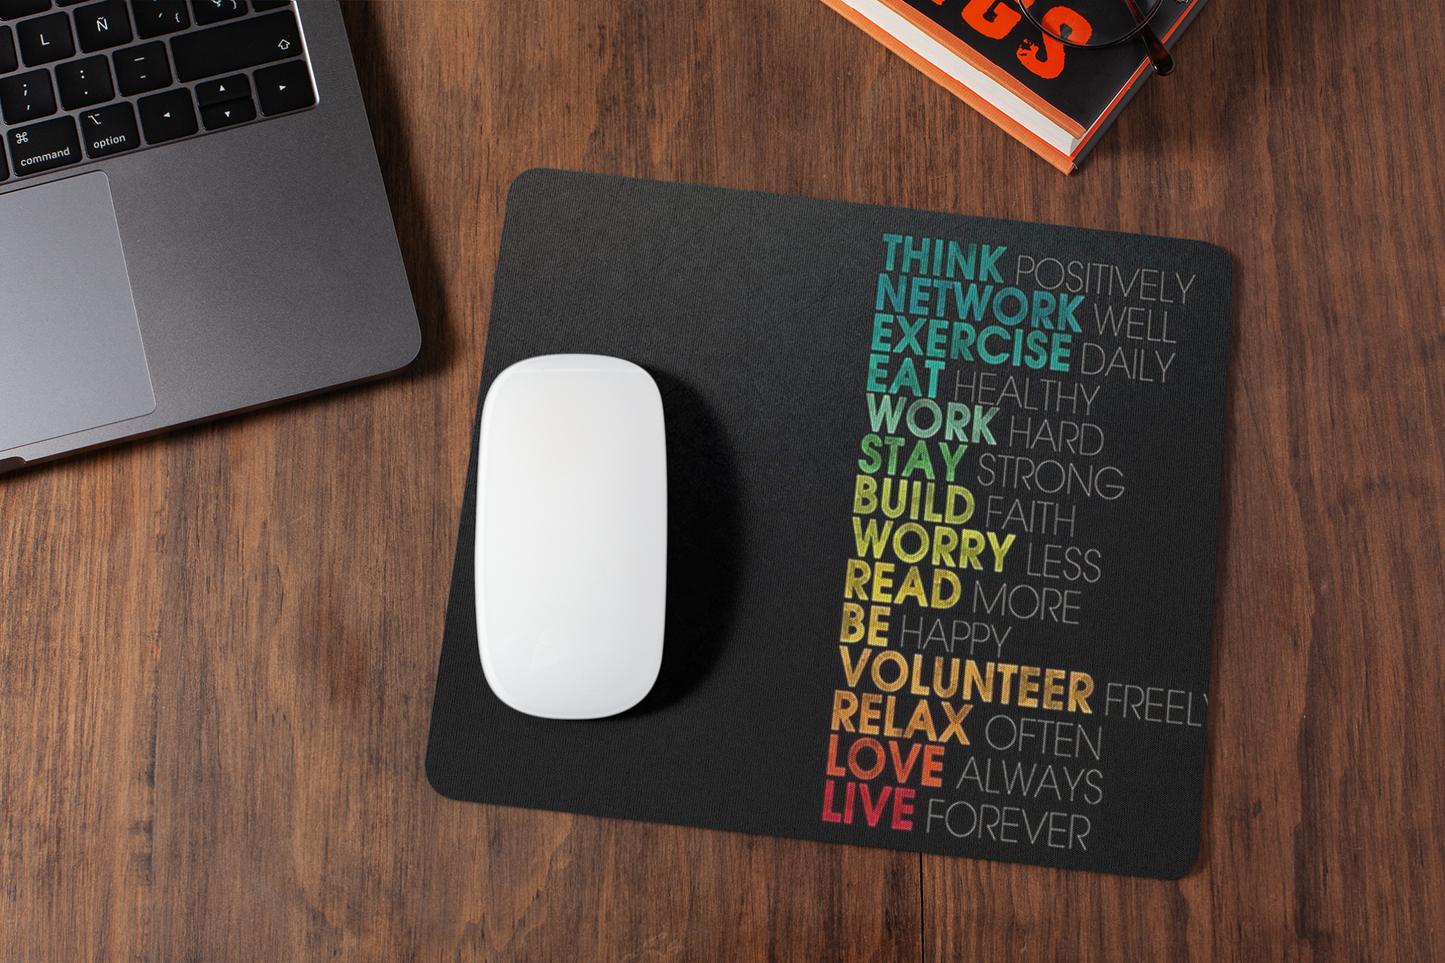 Think positively mousepad for laptop and desktop with Rubber Base - Anti Skid